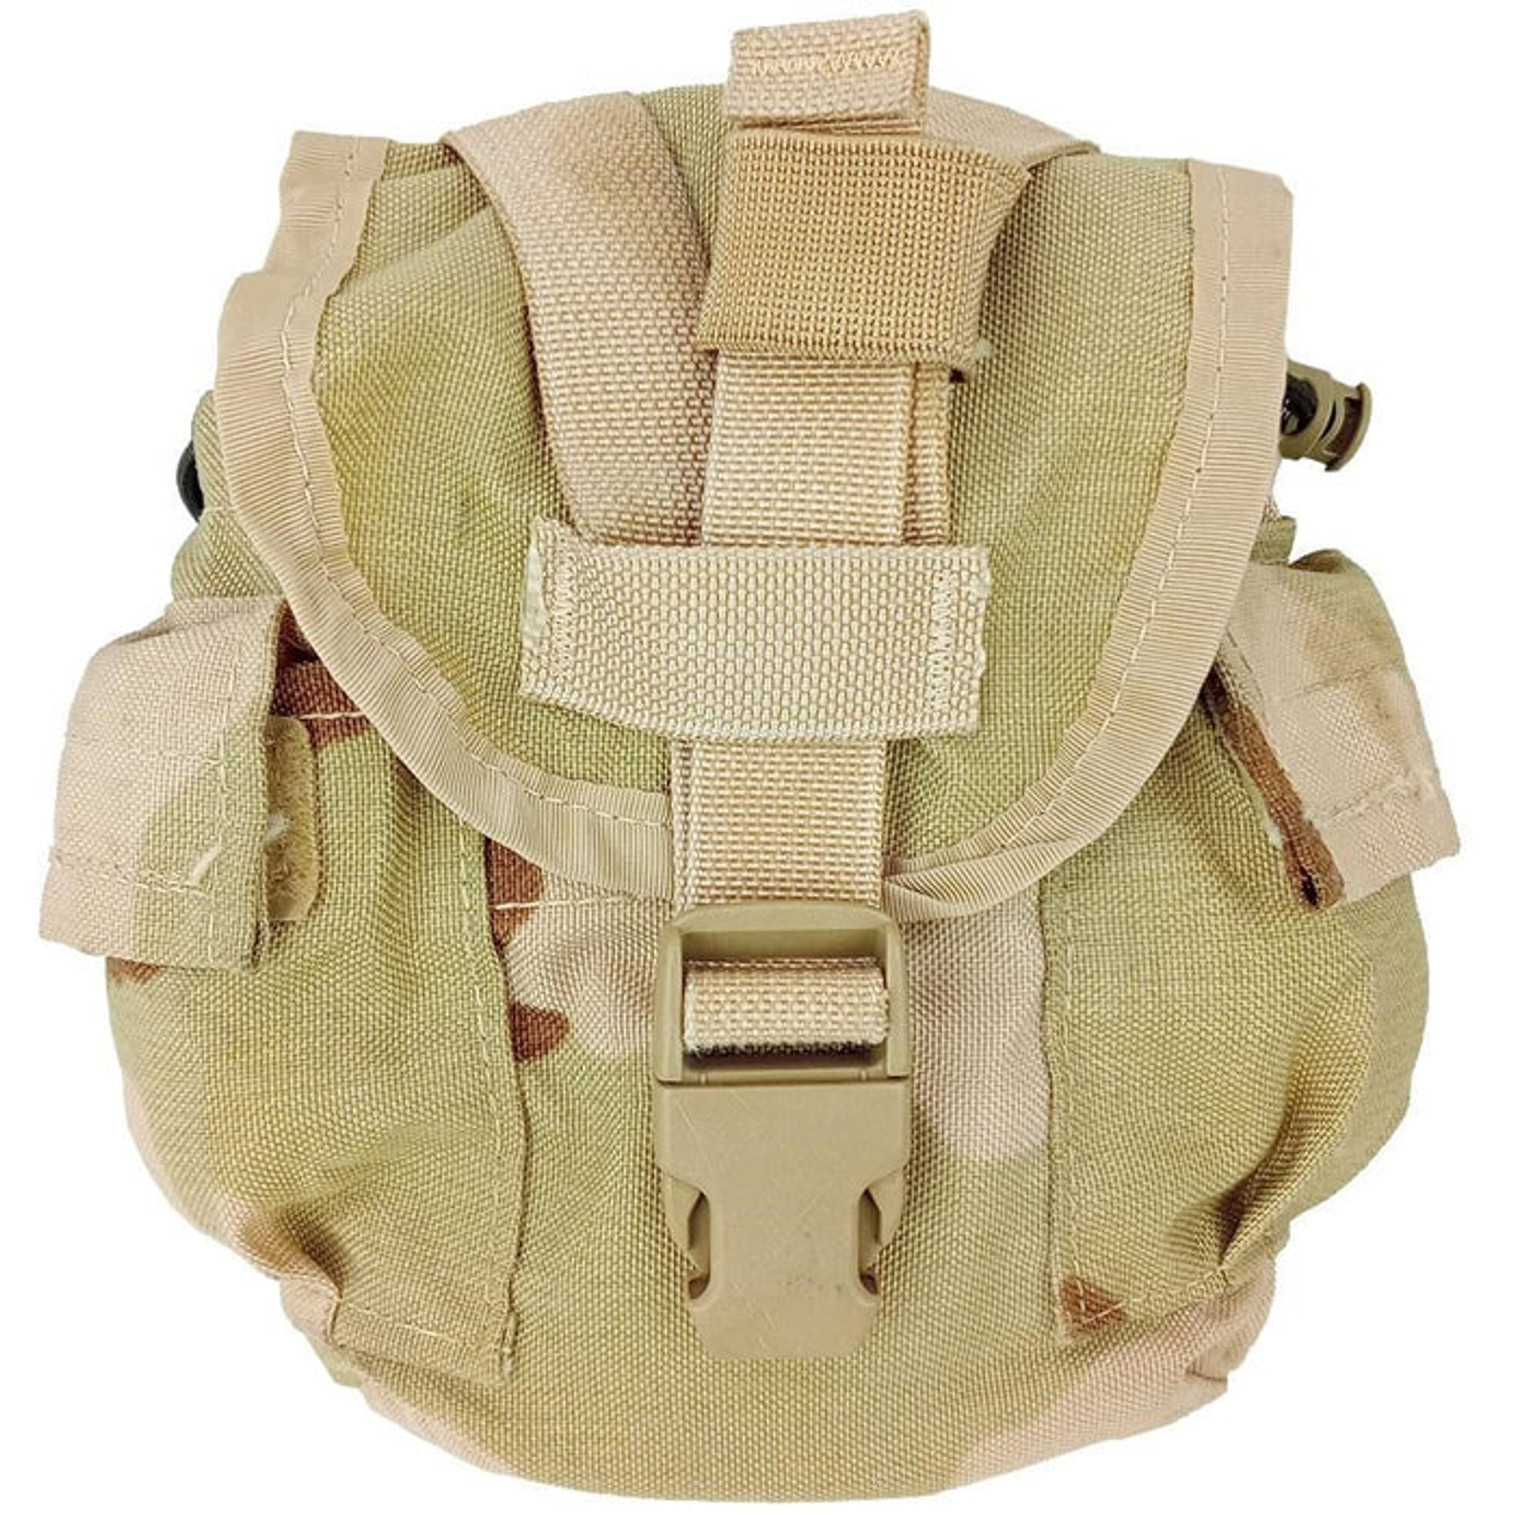 U.S. Armed forces MOLLE II Canteen Pouch 3 Color Desert